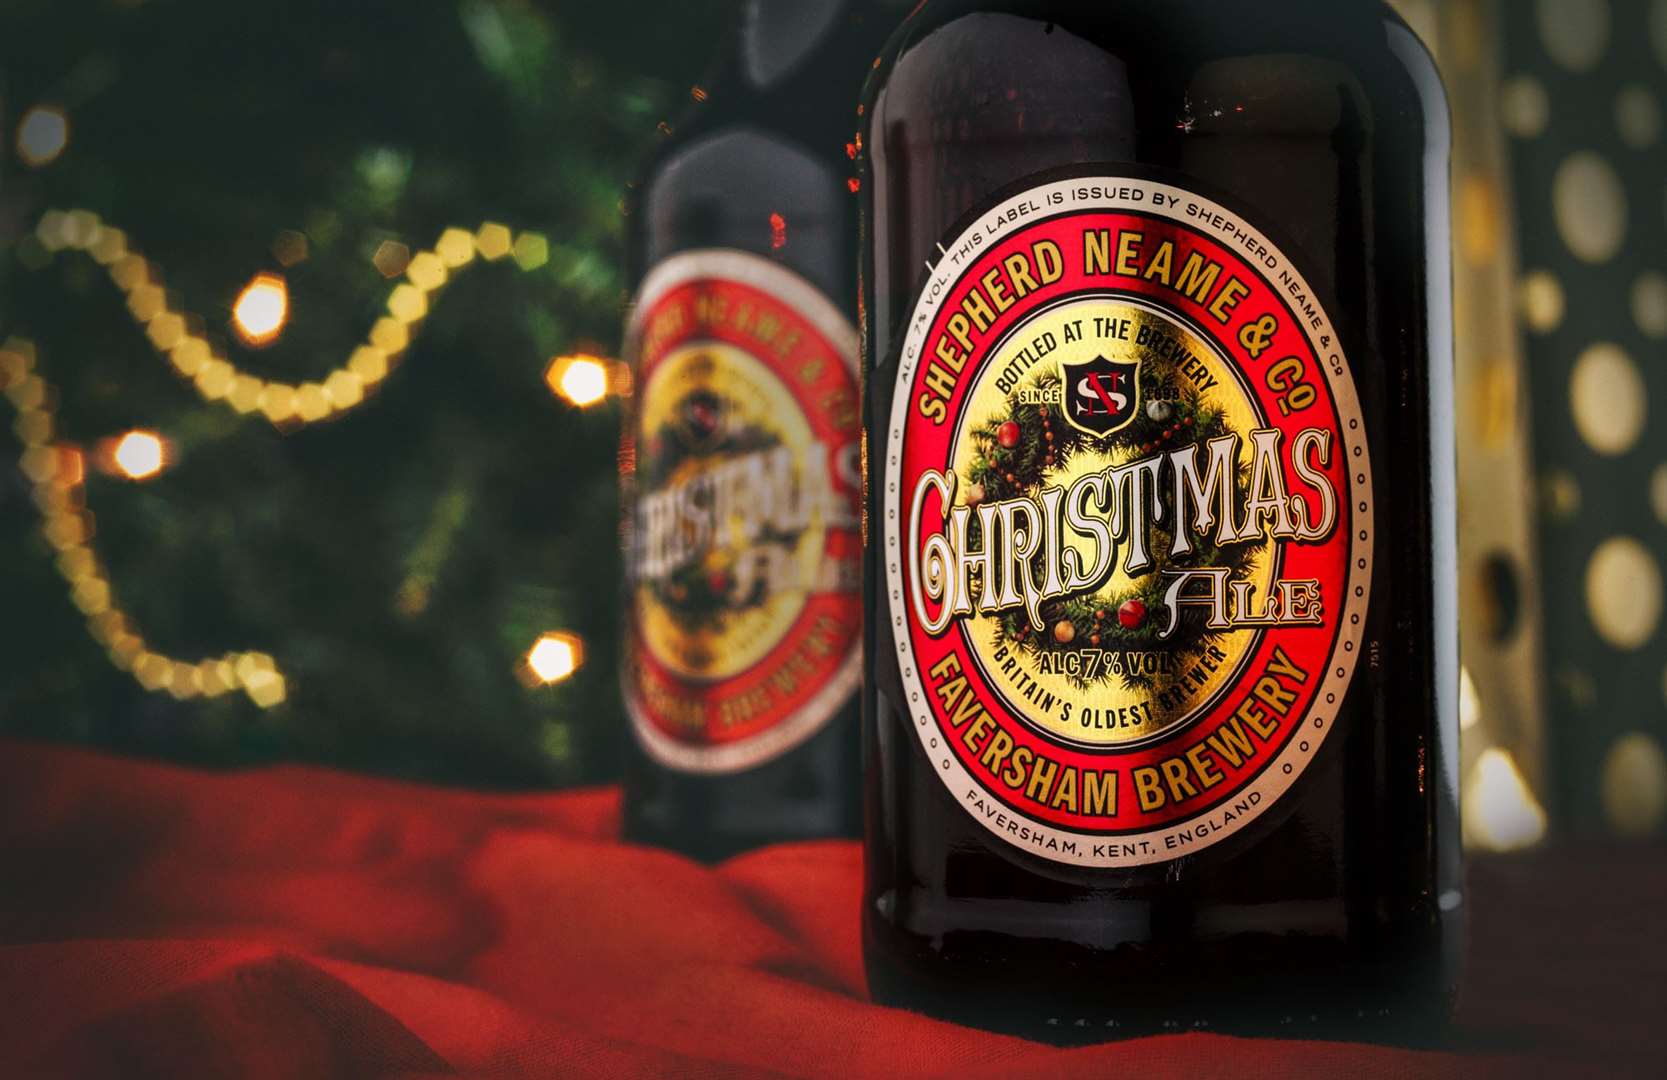 Sheps' Christmas Ale was crowned gold at the awards